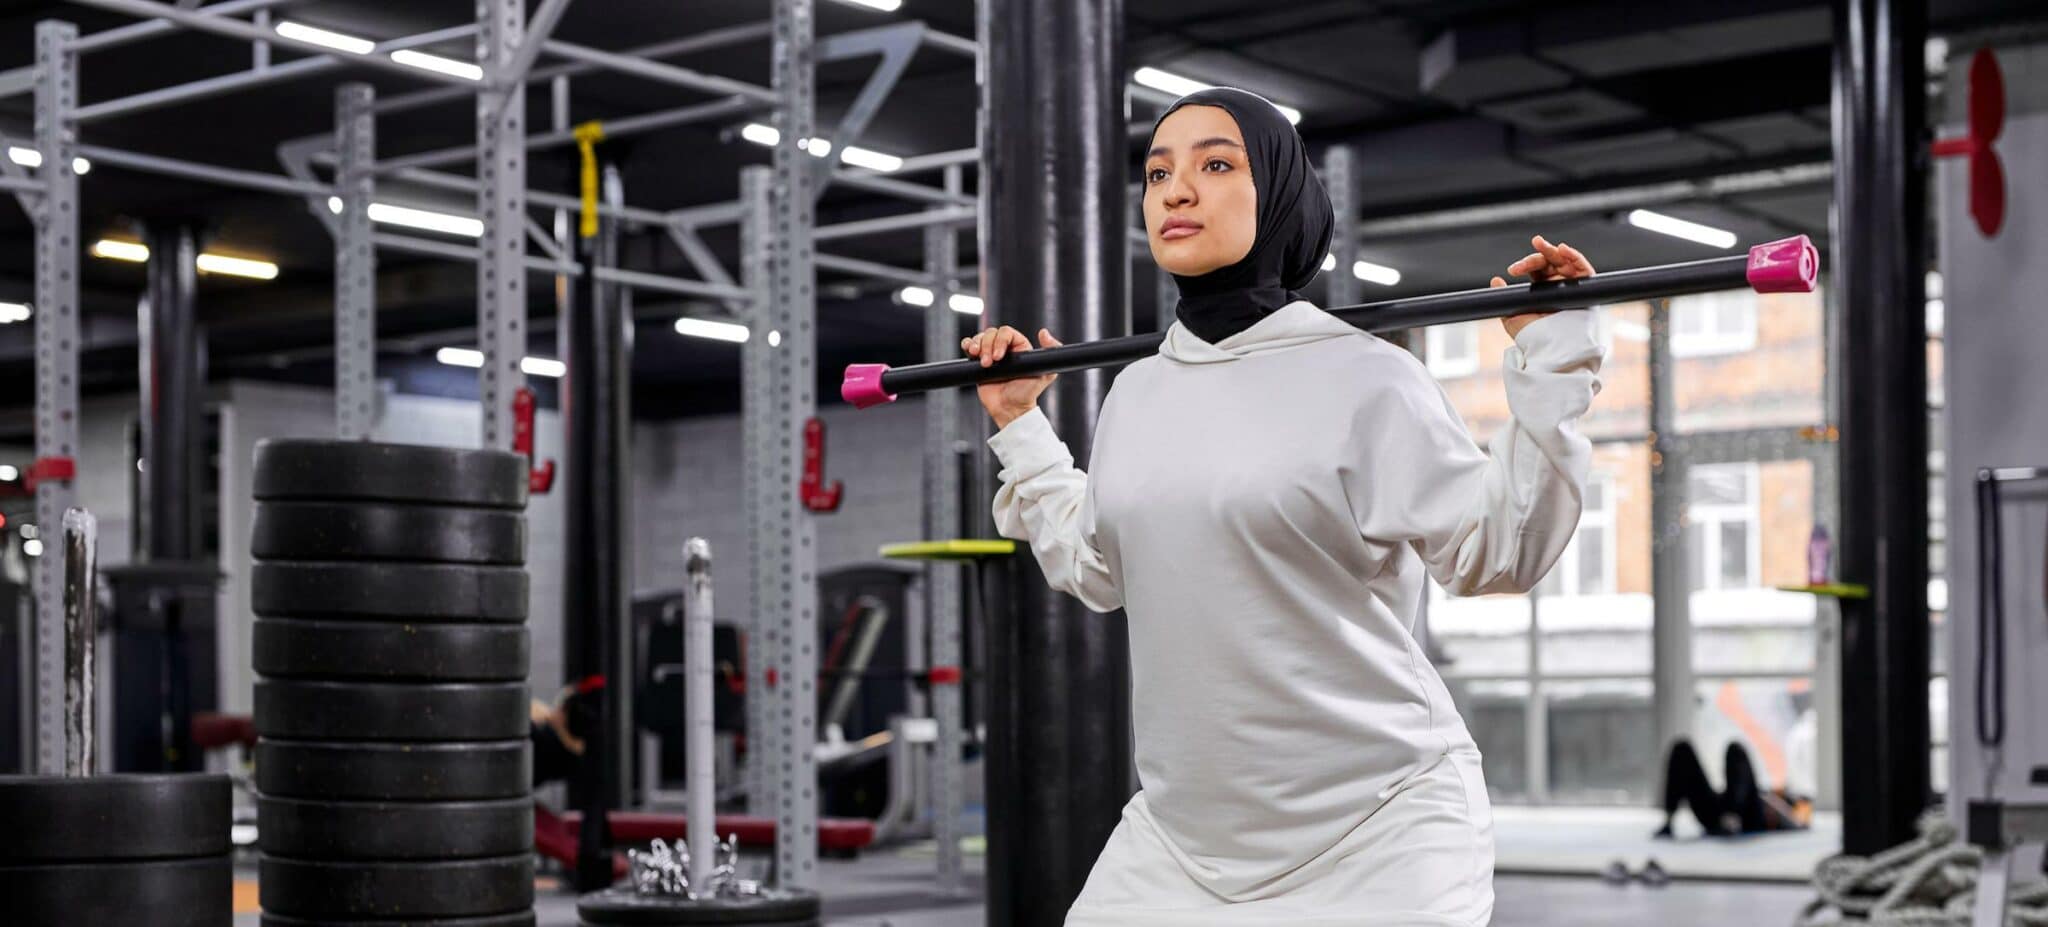 muslim woman lifts heavy weights in gym e1648664208211